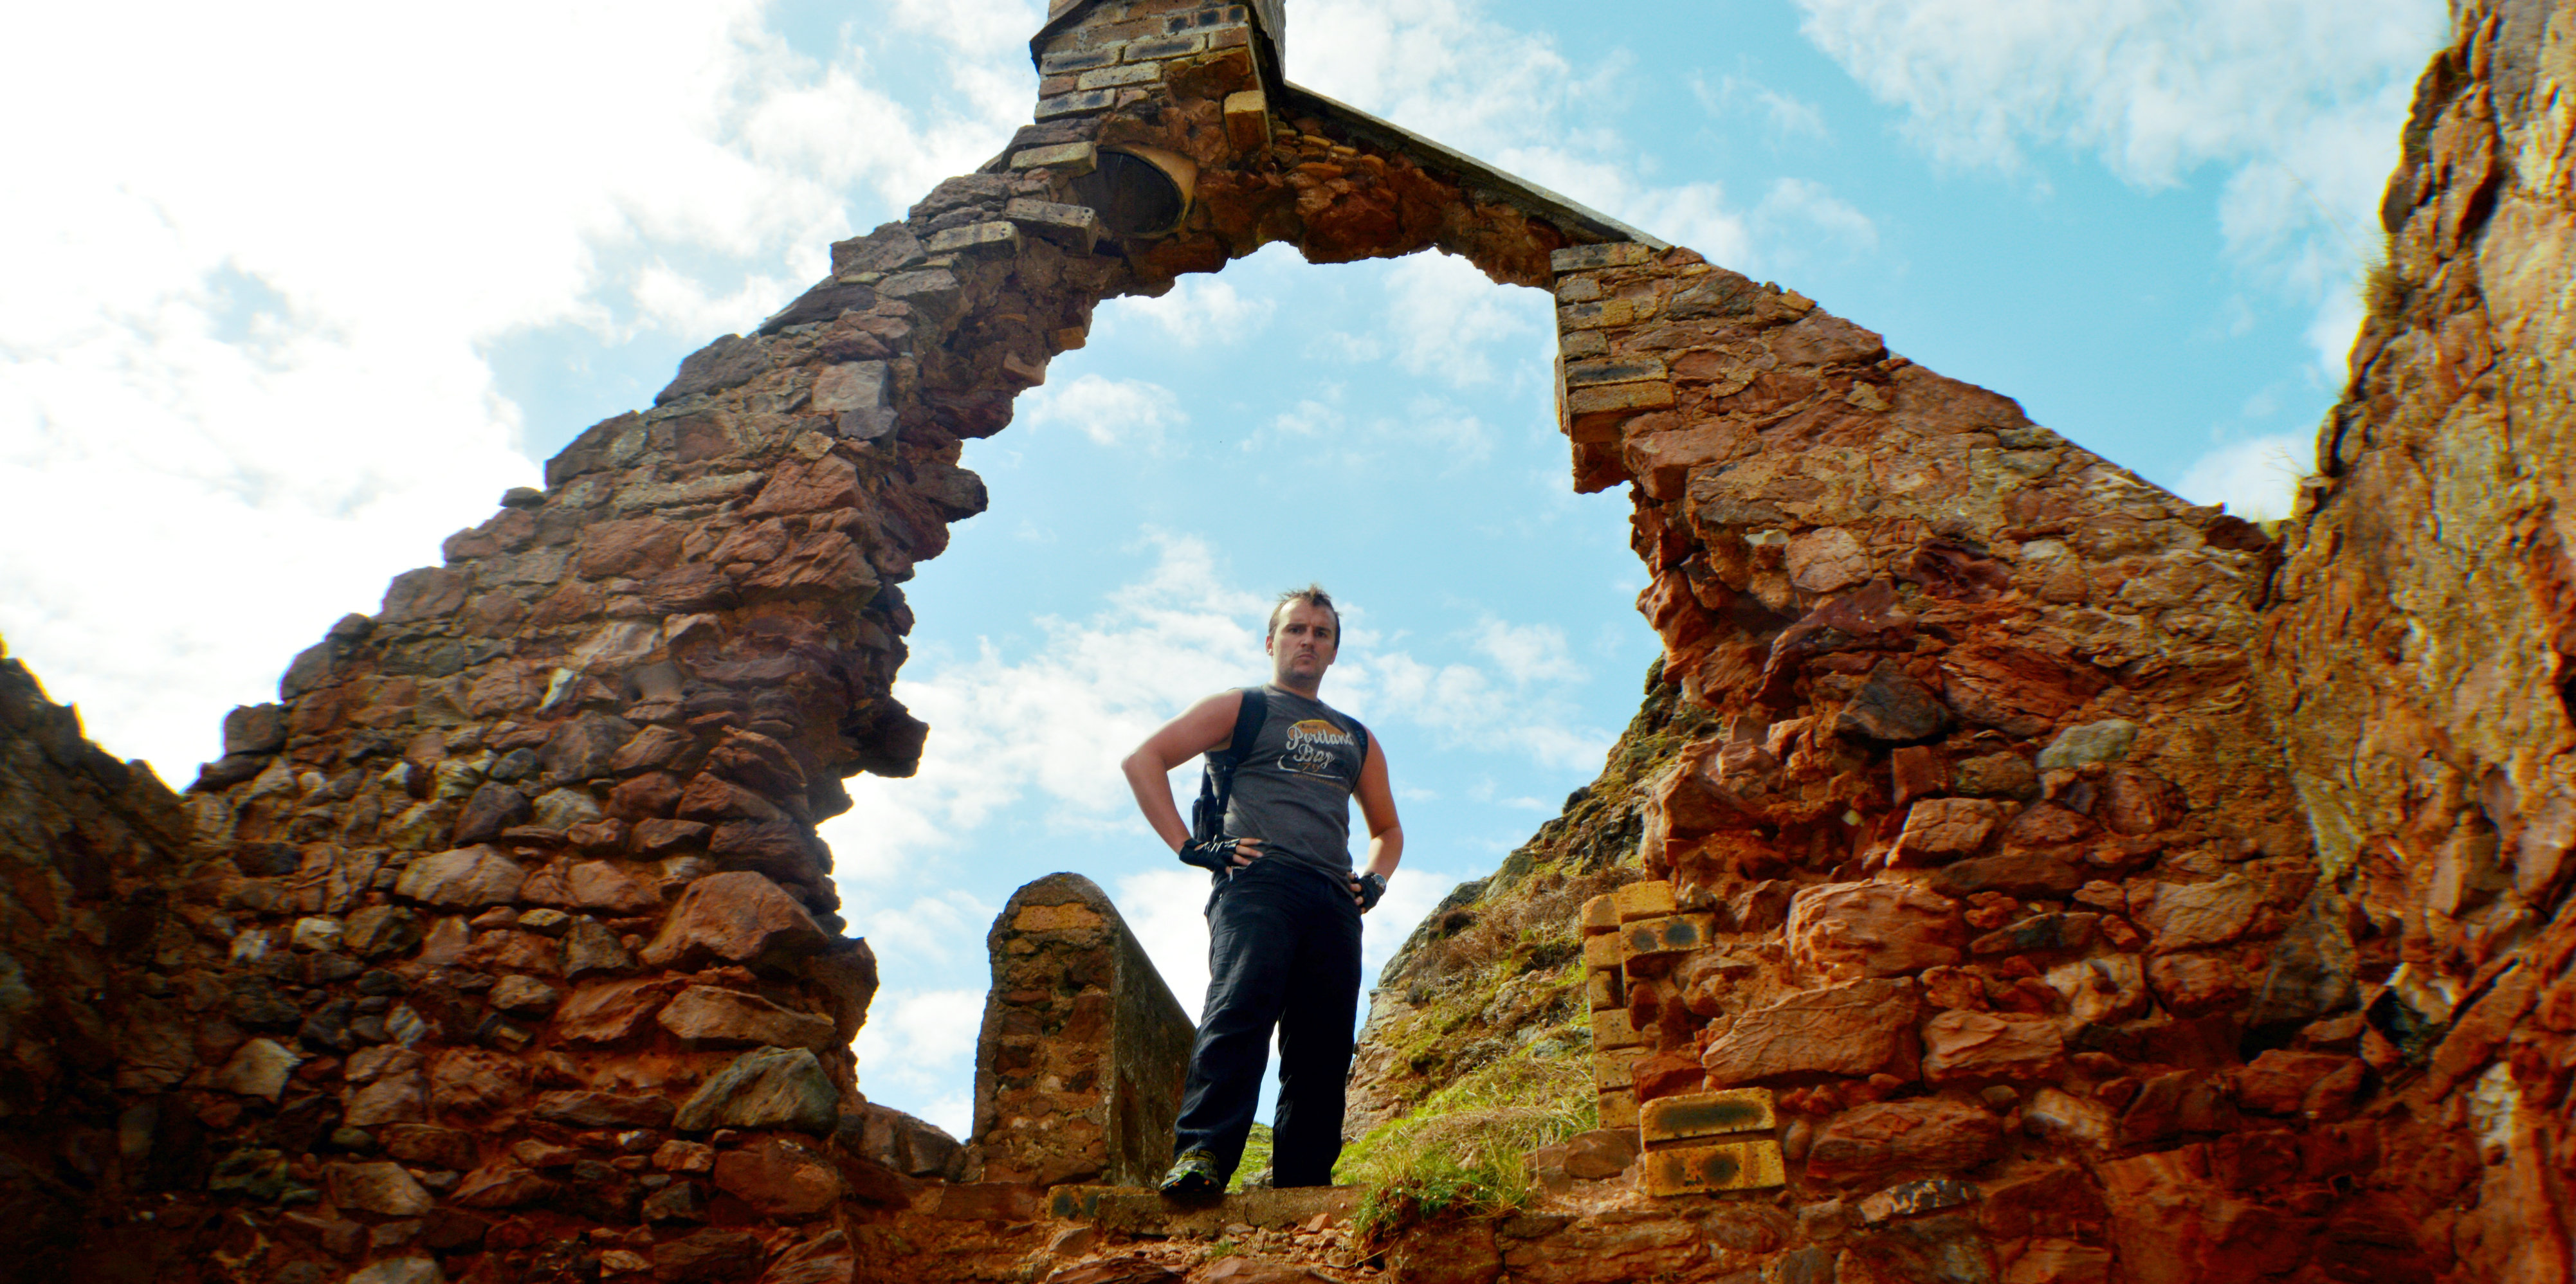 Shawn stands in the arch of the dilapidated smuggler's bothy.